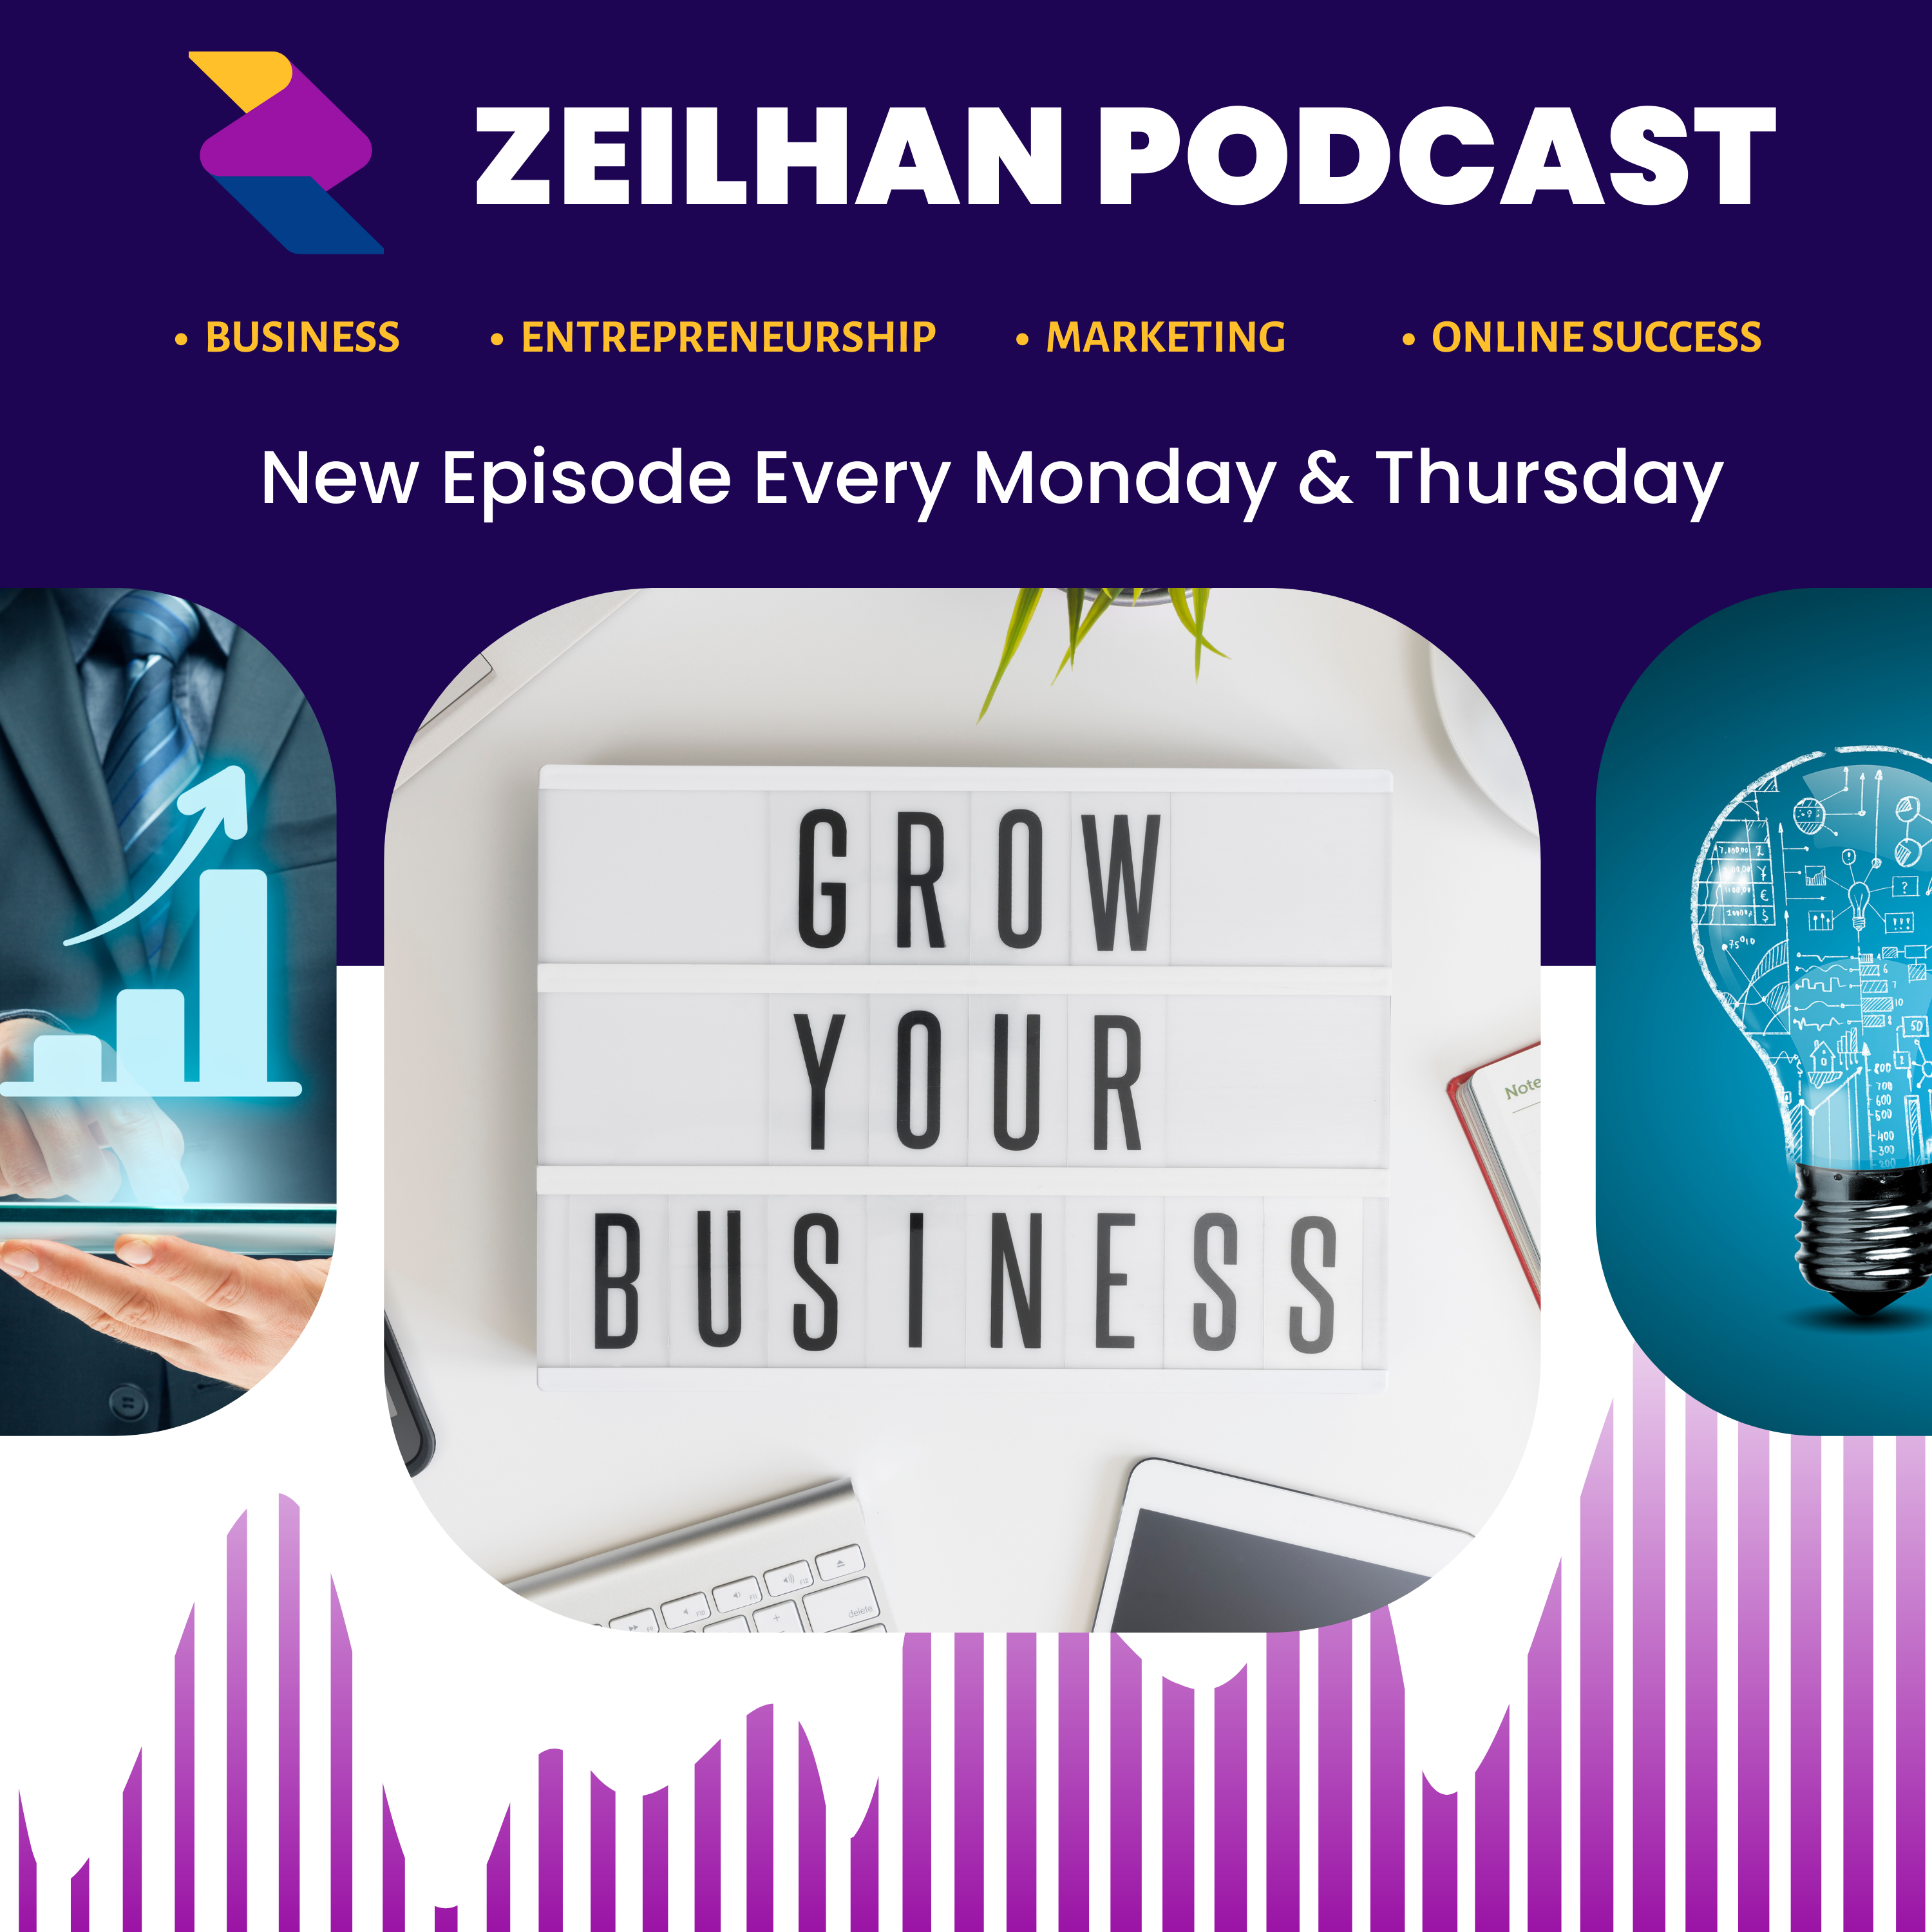 Zeilhan's Podcast